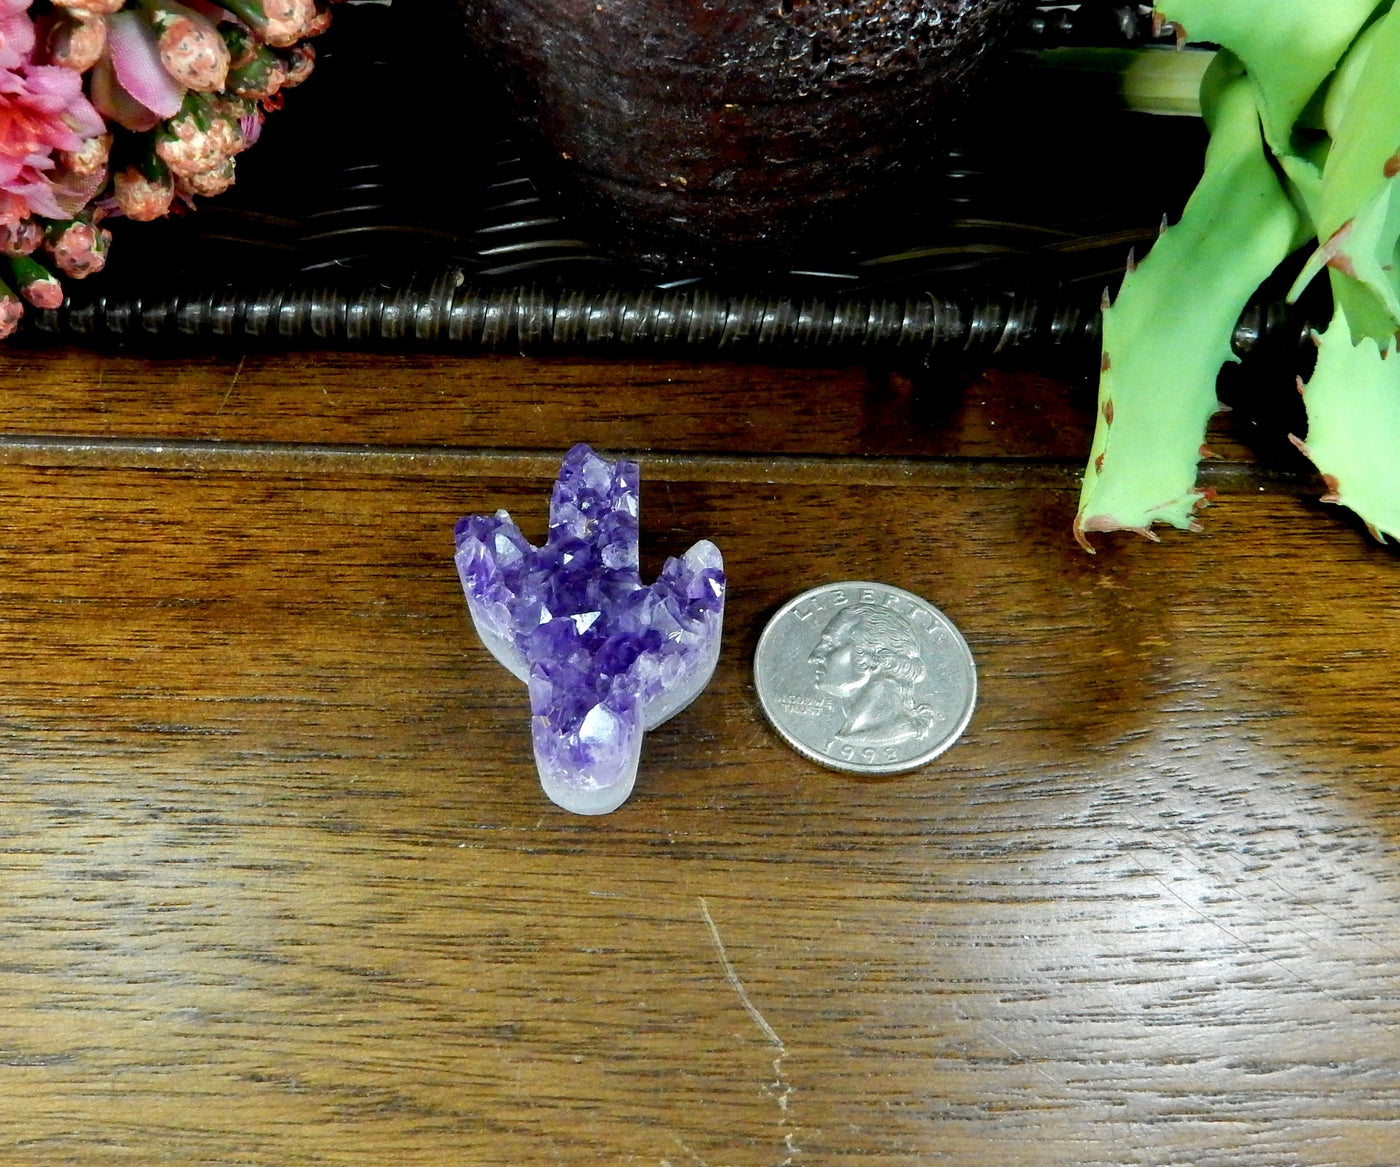 amethyst cactus displayed next to quarter for size reference